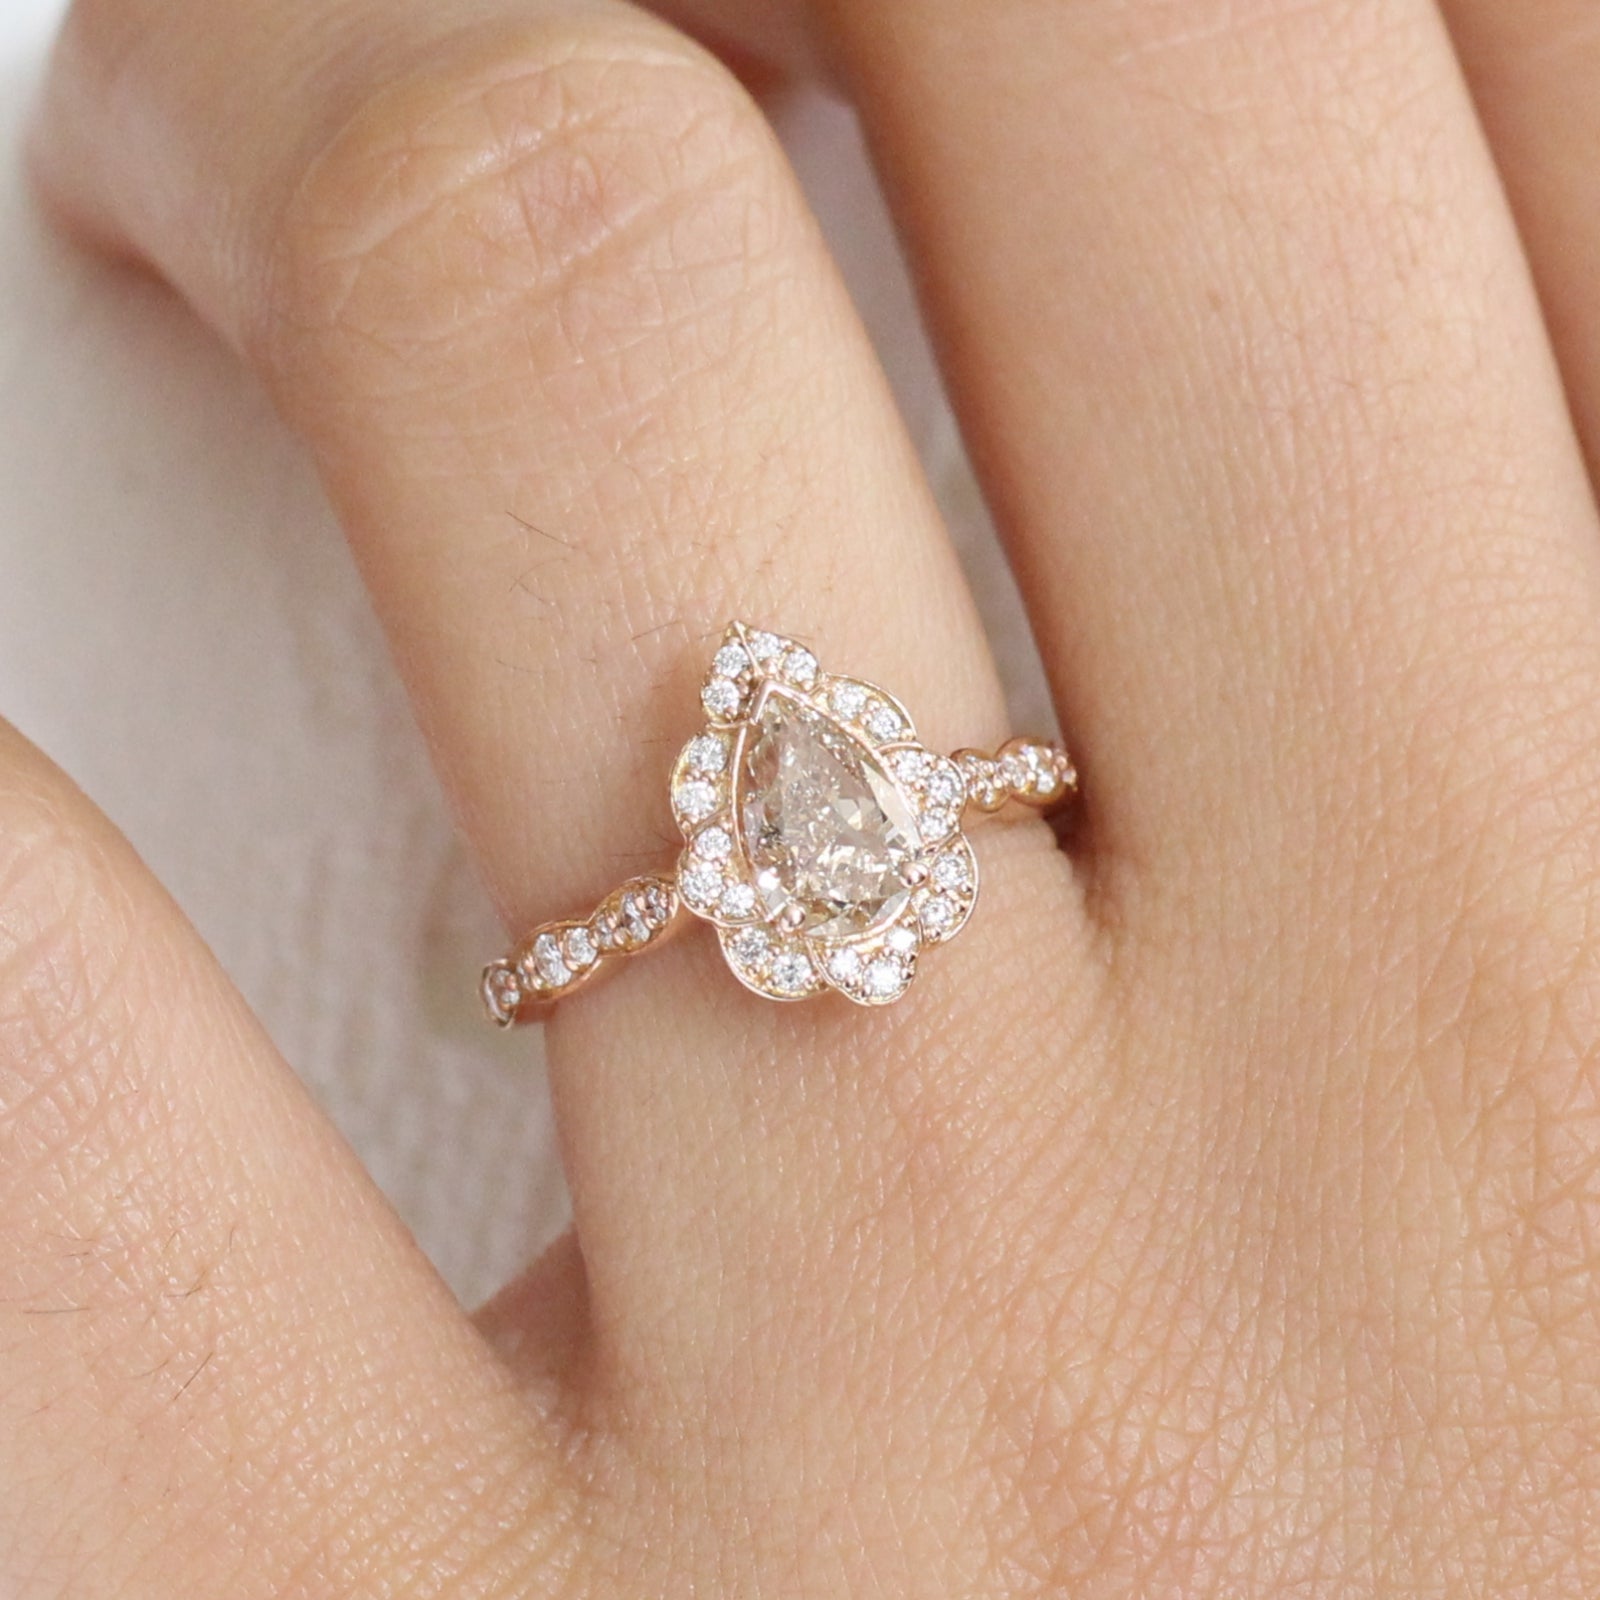 Champagne Diamond Engagement Ring in Rose Gold Vintage Floral Pear Ring by La More Design Jewelry